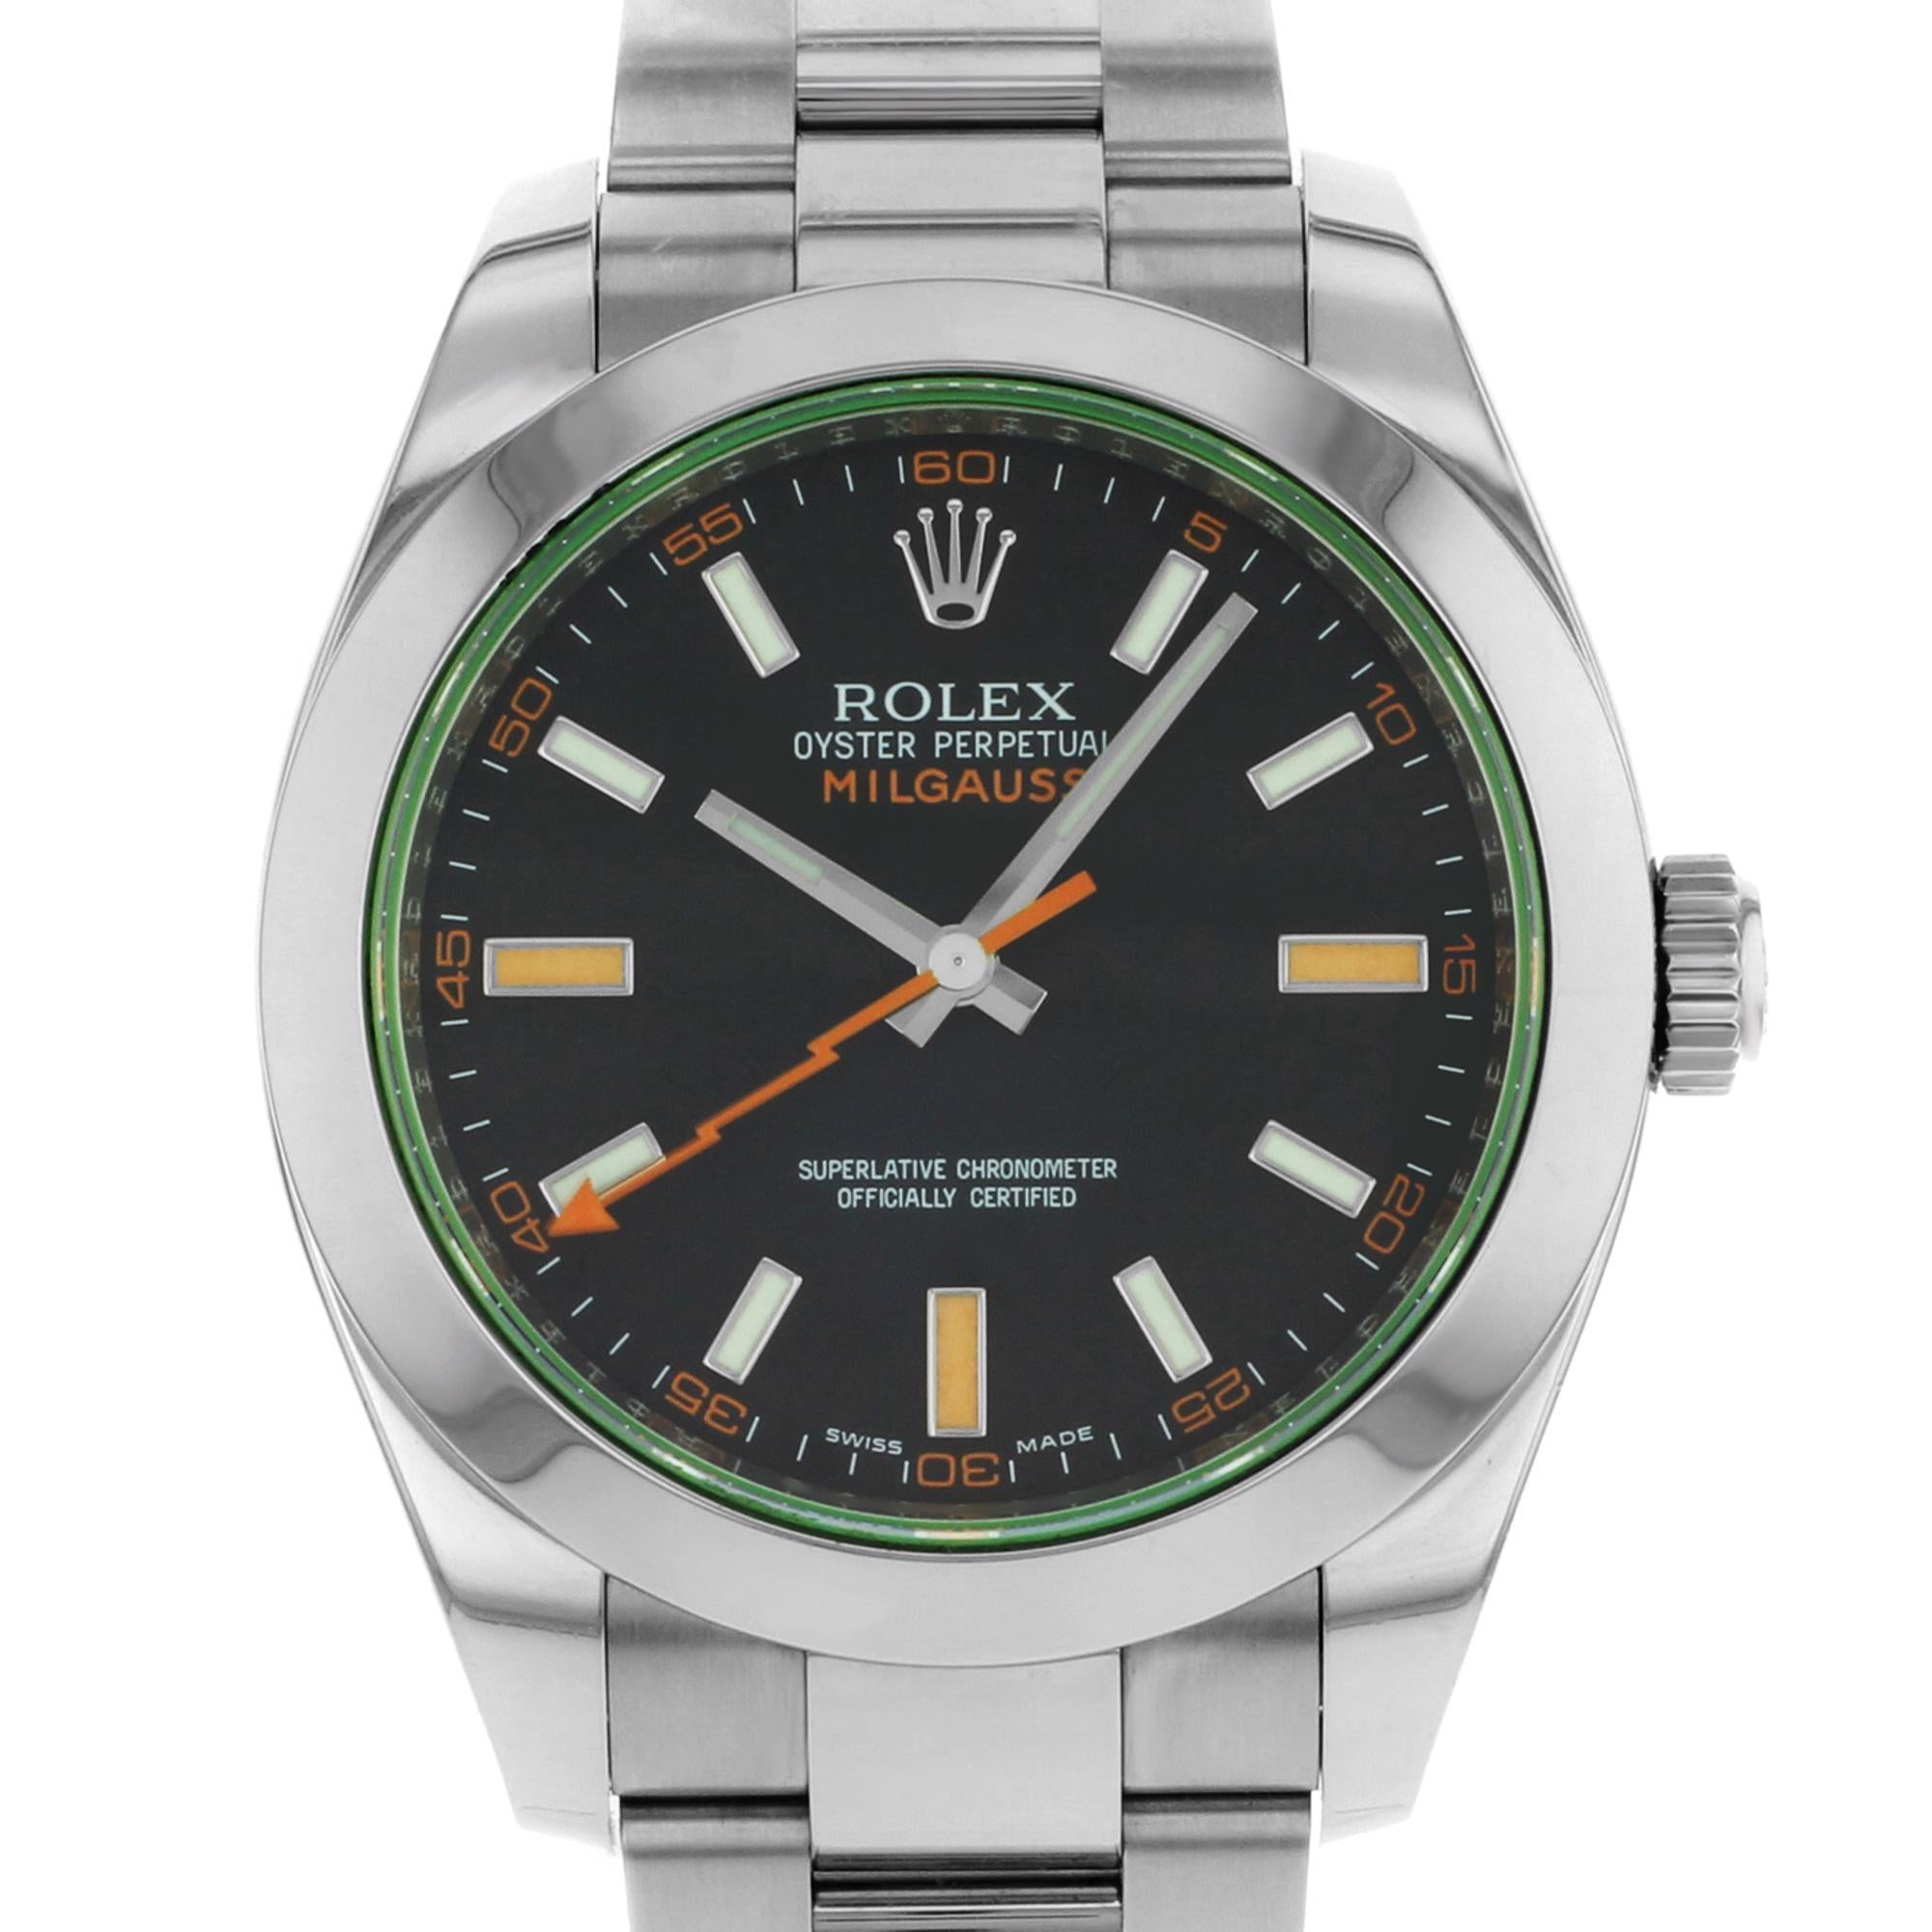 Pre Owned Rolex Milgauss Steel Black Dial Green Crystal Automatic Men's Watch 116400GV BKO. This Beautiful Timepiece comes with 2012 card and is Powered by Mechanical (Automatic) Movement And Features: Round Stainless Steel Case and Steel Oyster